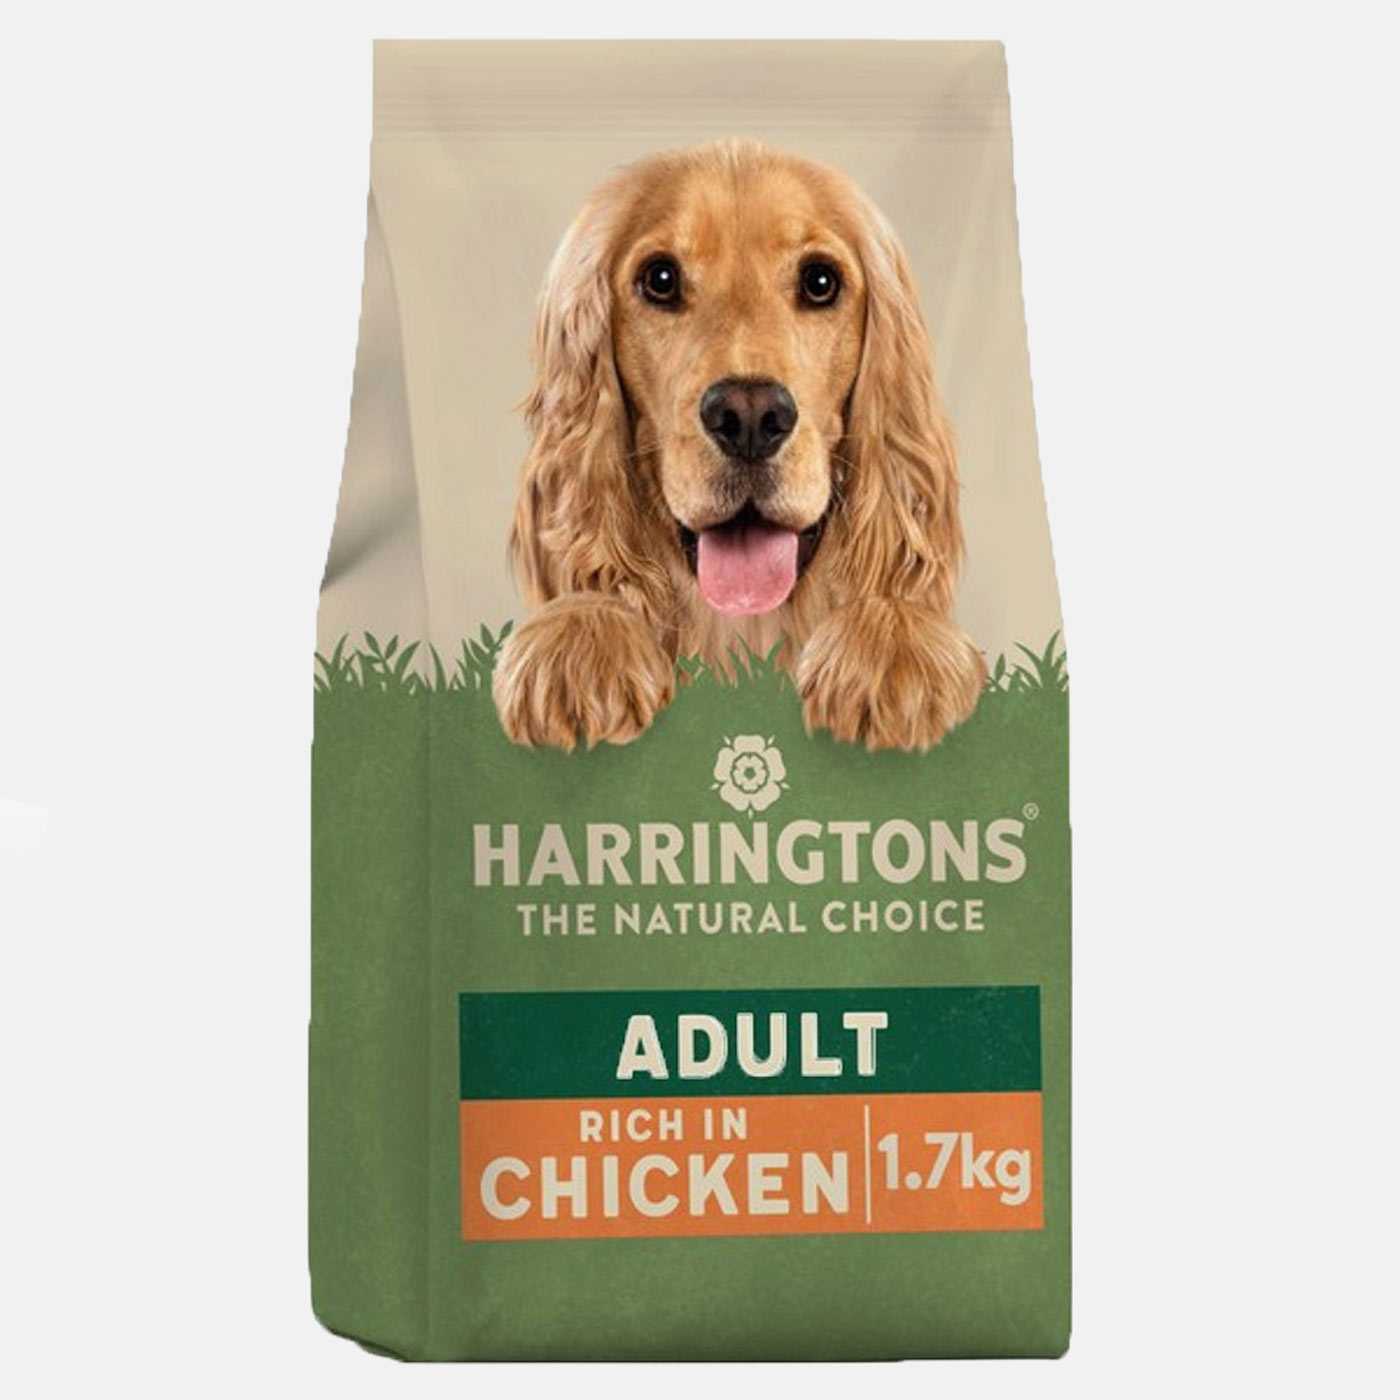 Harringtons Complete Adult Dry Dog Food with Chicken & Rice 1.7KG